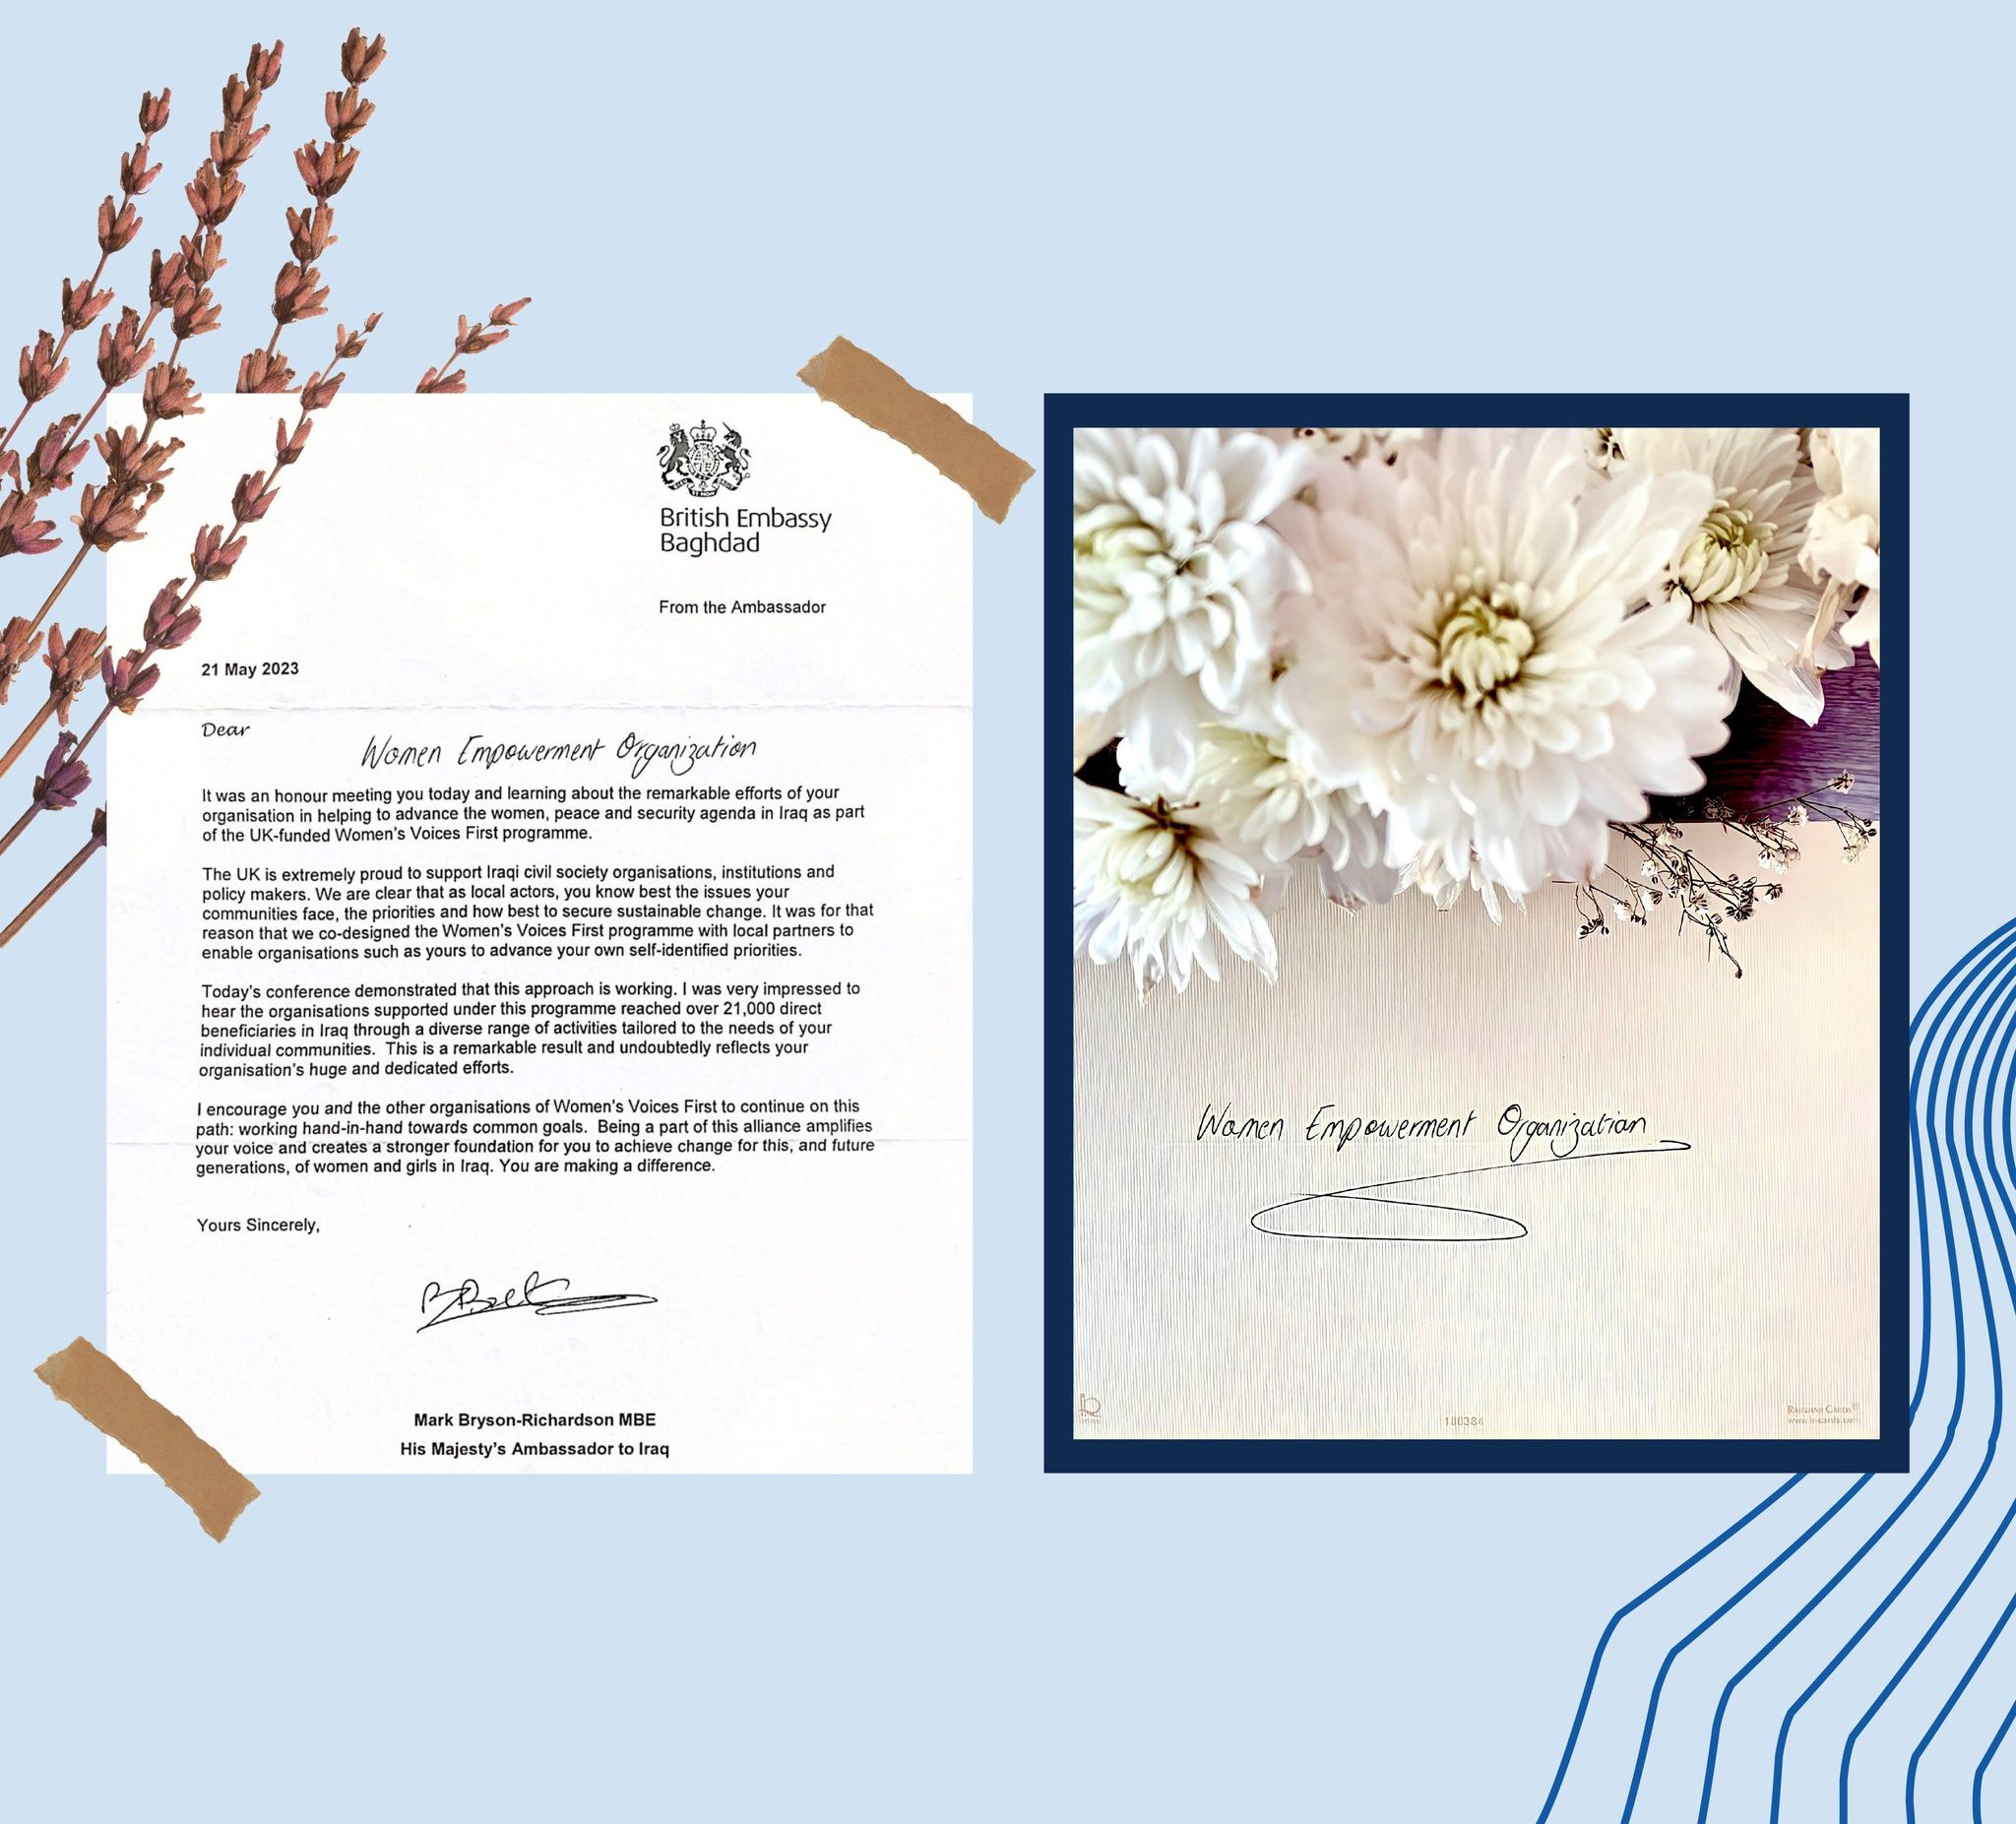 Appreciation letter from the British Embassy